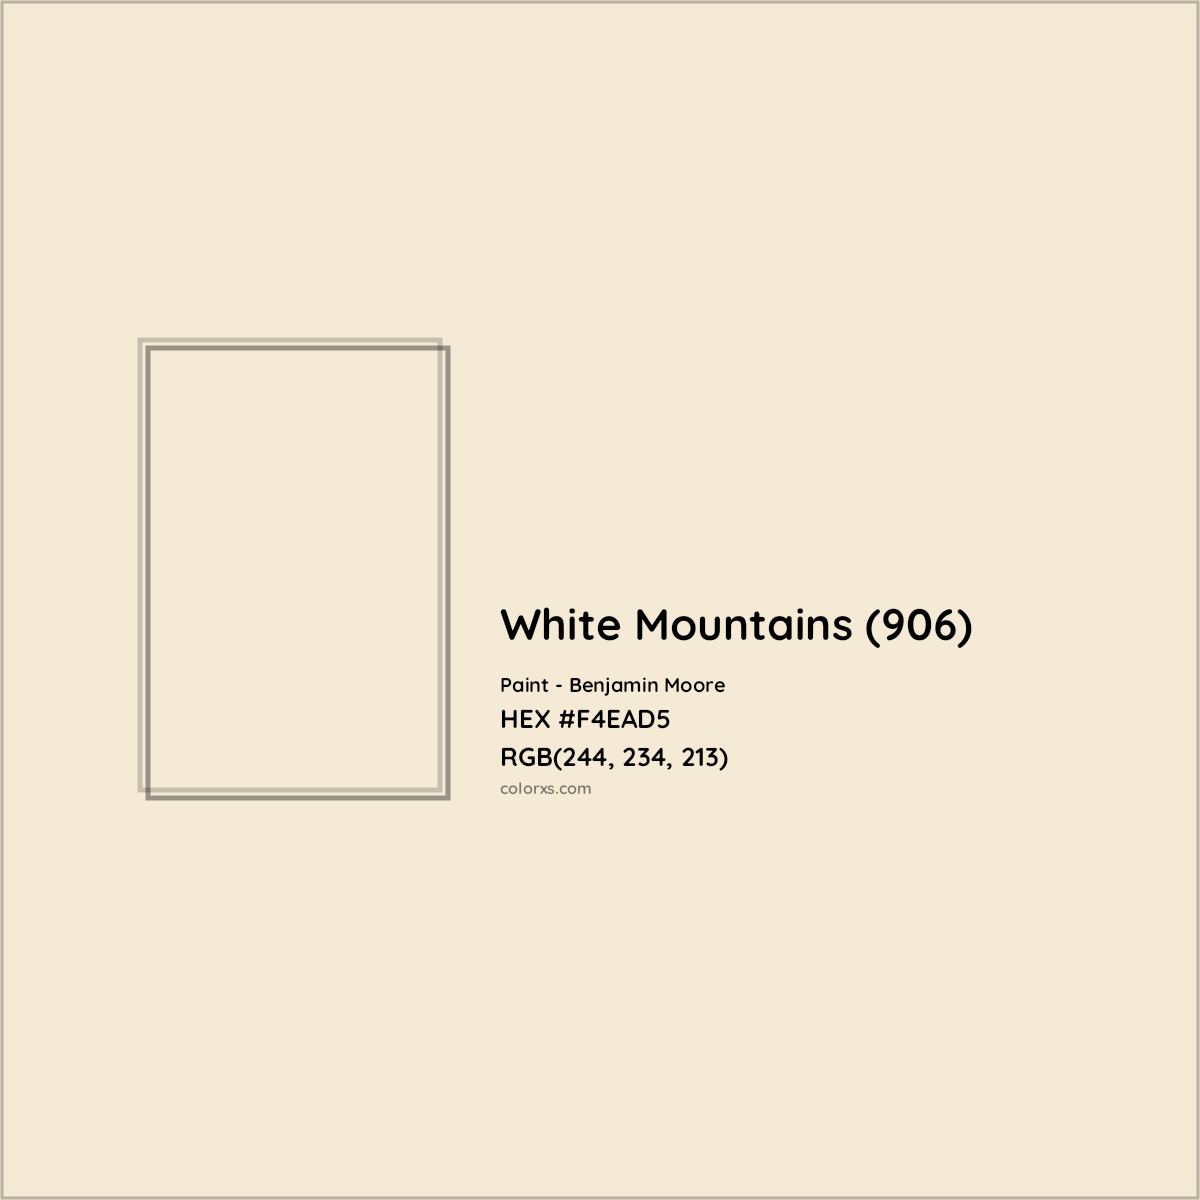 HEX #F4EAD5 White Mountains (906) Paint Benjamin Moore - Color Code